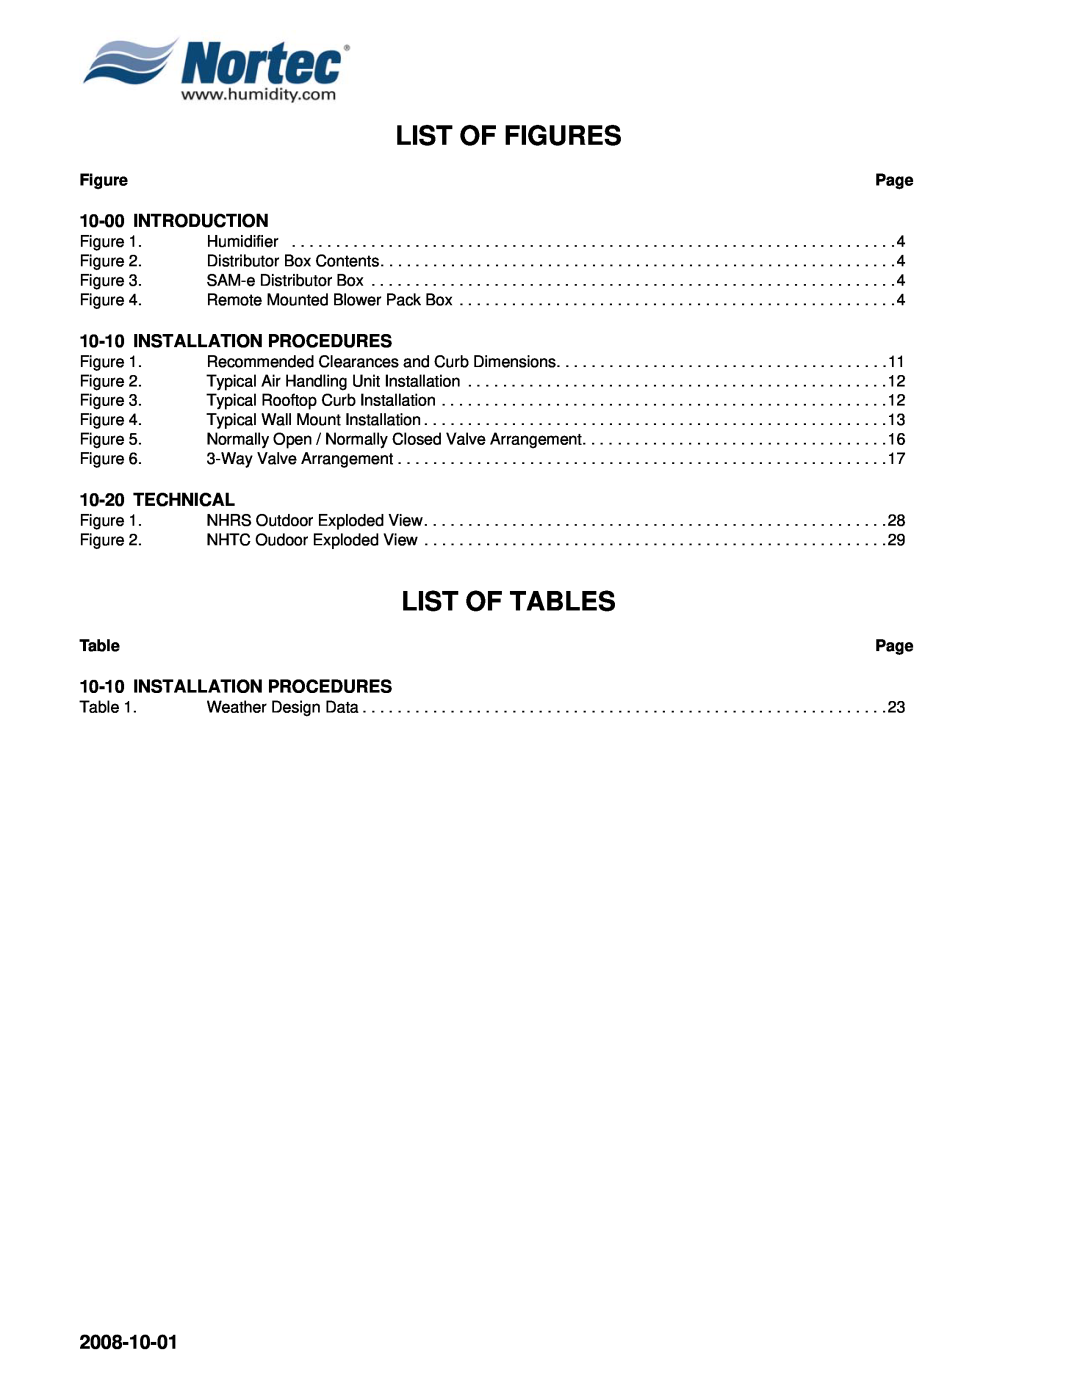 Nortec Industries NH Series List Of Figures, List Of Tables, 2008-10-01, 10-00INTRODUCTION, 10-10INSTALLATION PROCEDURES 